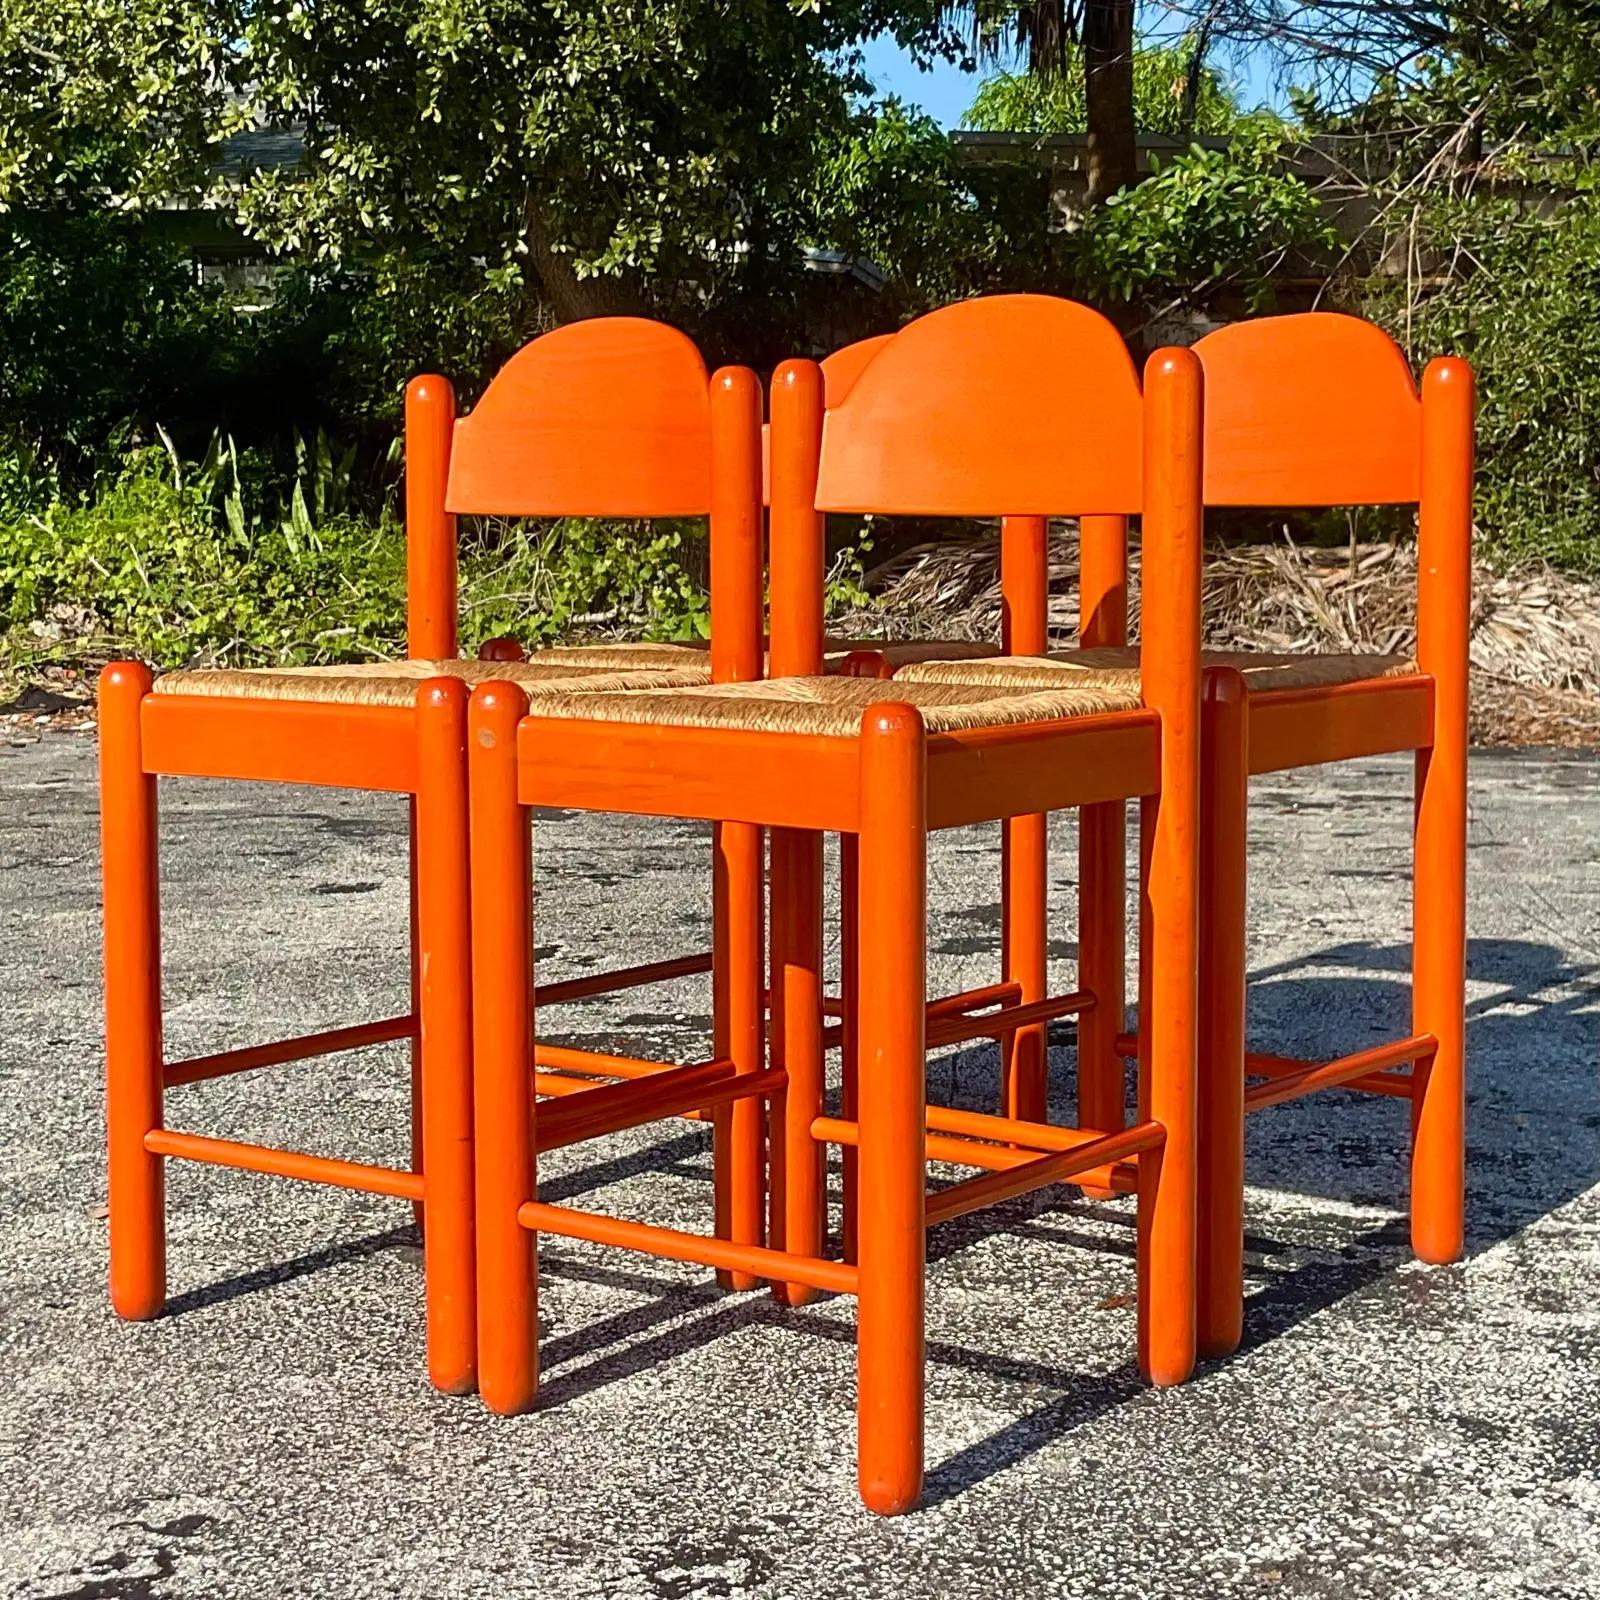 A fabulous set of vintage Boho bar stools. A beautiful Hermes orange with chic Rush seats. Made in Italy and marked on the bottom of one stool. Acquired from a Palm Beach estate.

The stools are in good vintage condition. Scuffs and blemishes